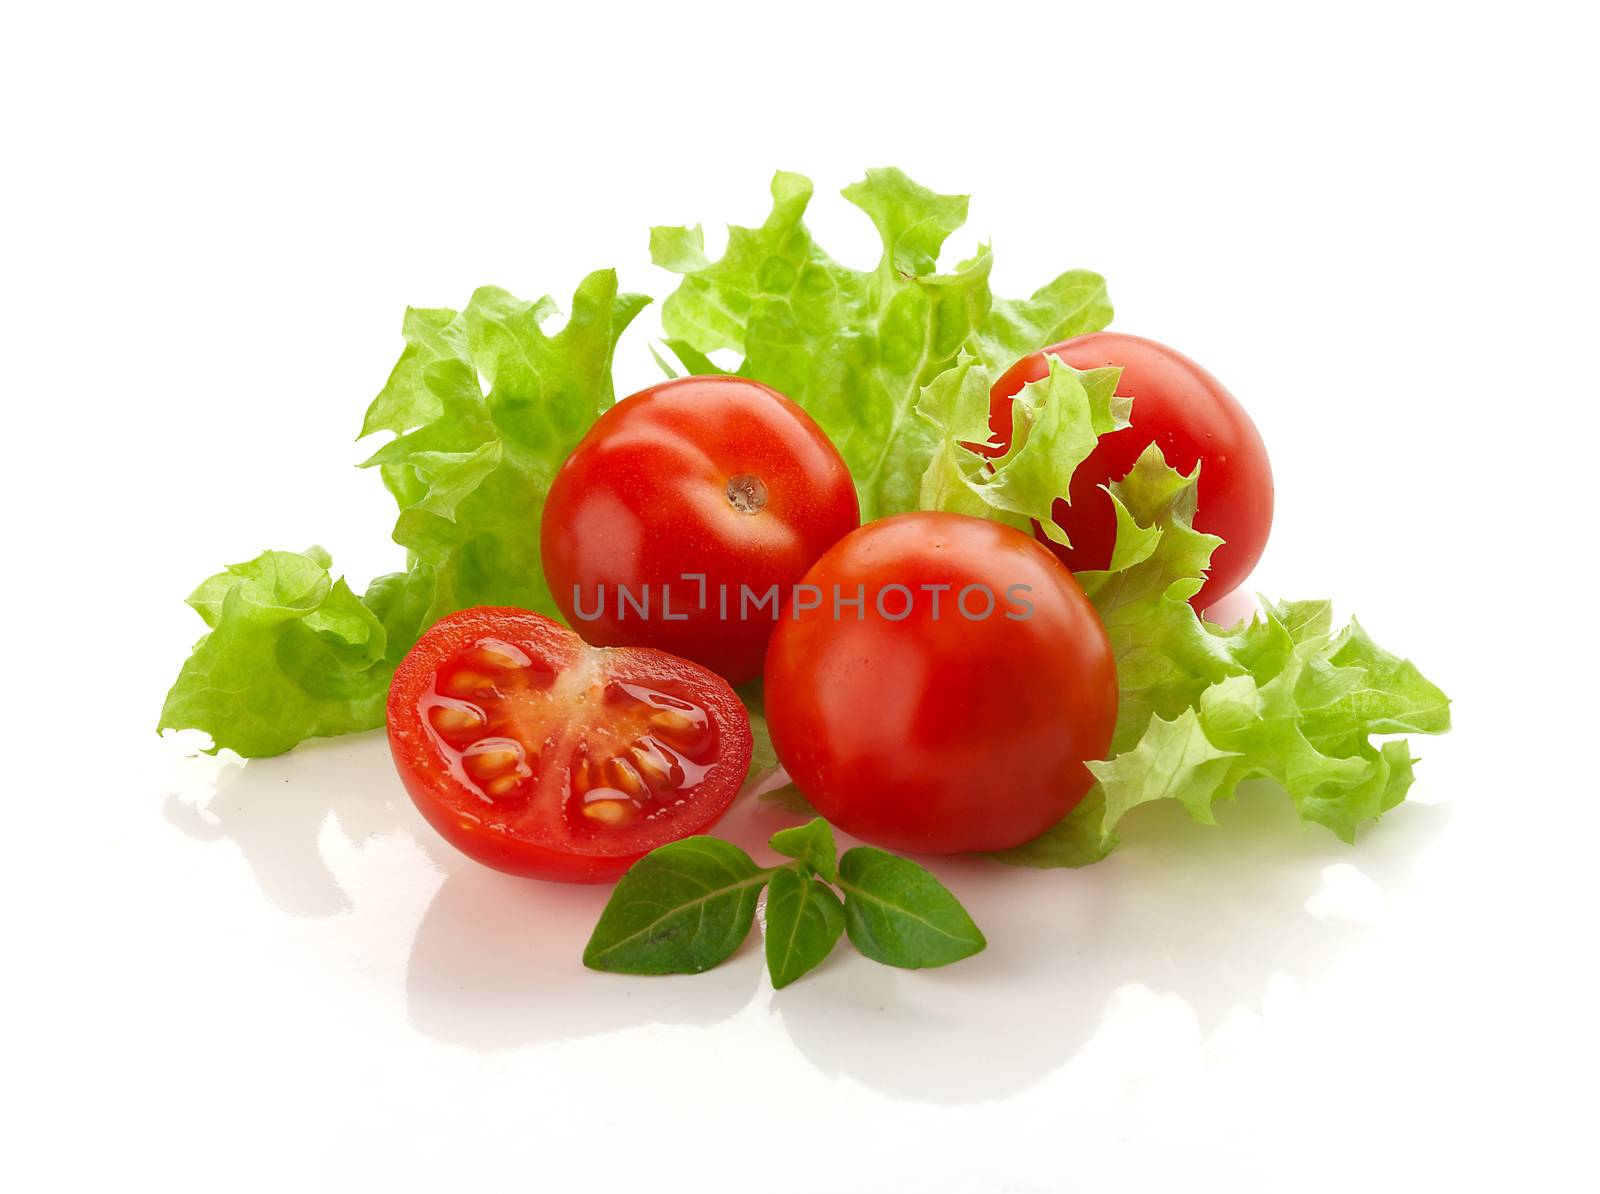 Cherry tomatoes with lettuce by Angorius